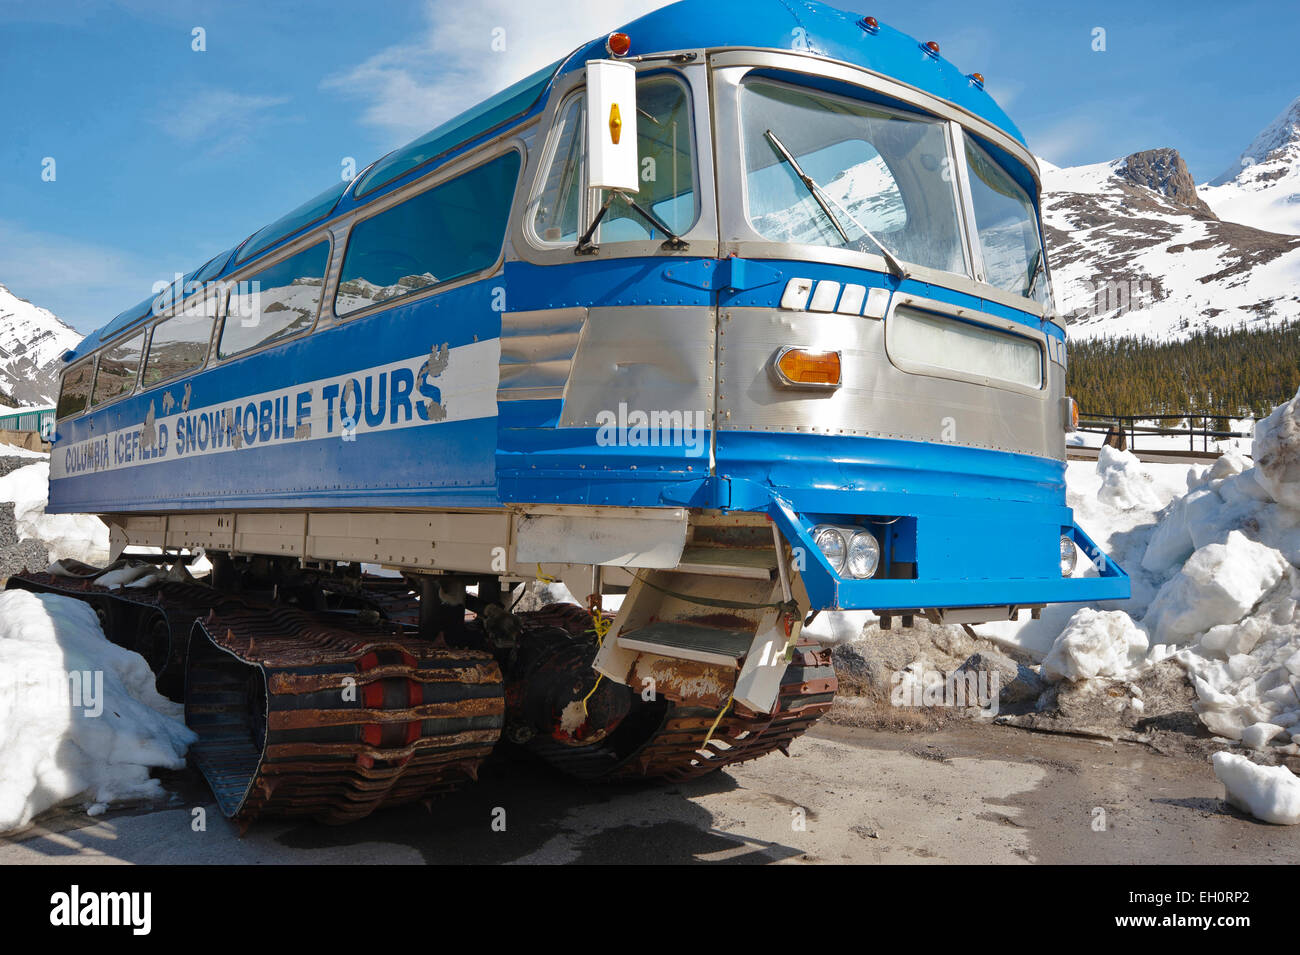 Jasper National Park, Canada - May 13, 2012: Snow coach at the Icefield Center at the Athabasca Glacier, Columbia icefield Stock Photo